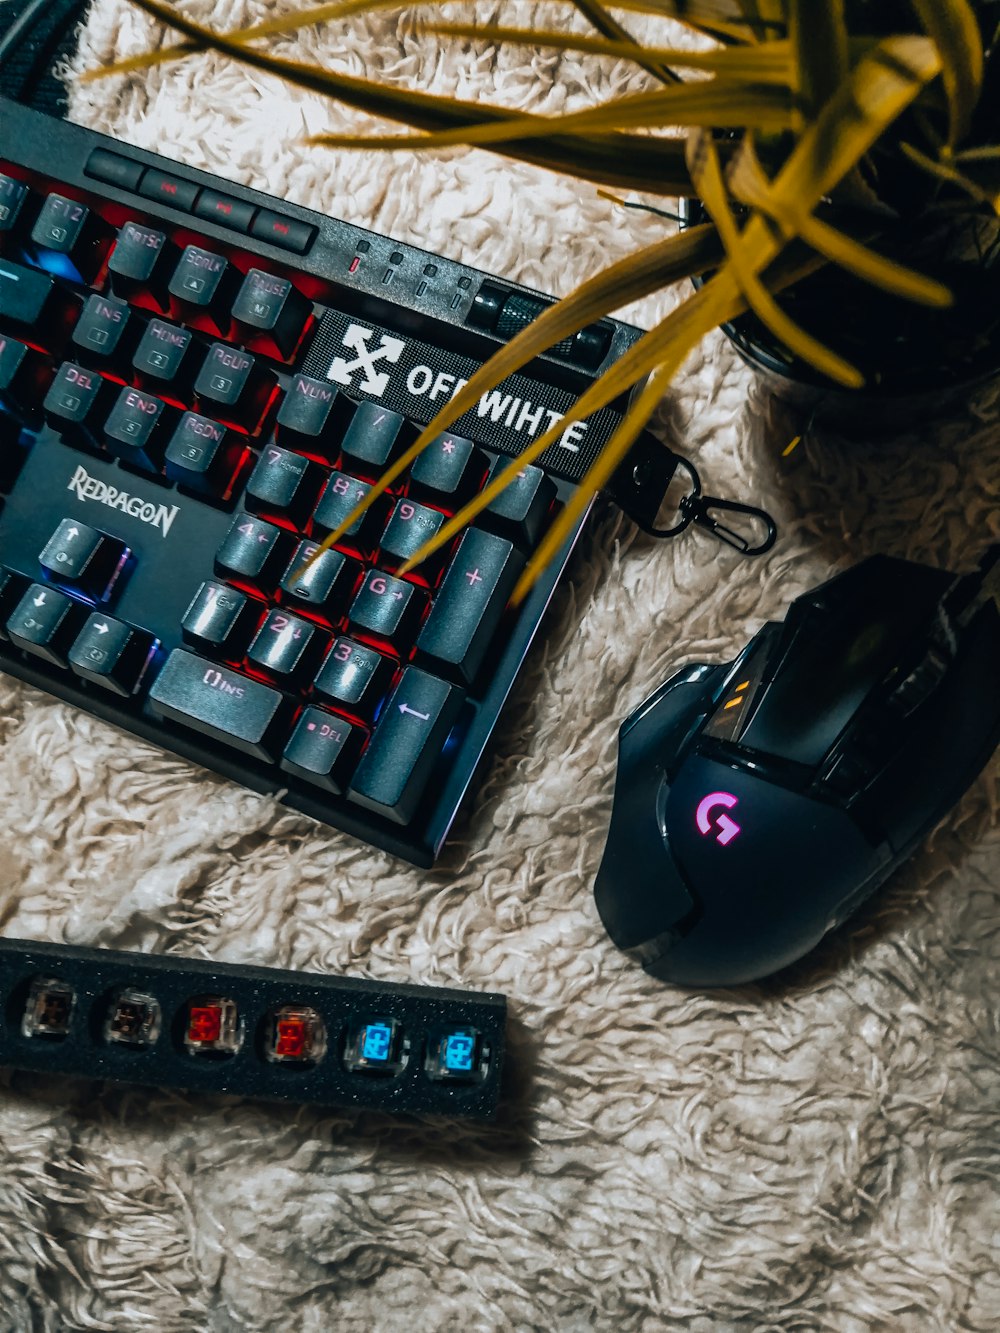 black and blue gaming computer keyboard beside black remote control